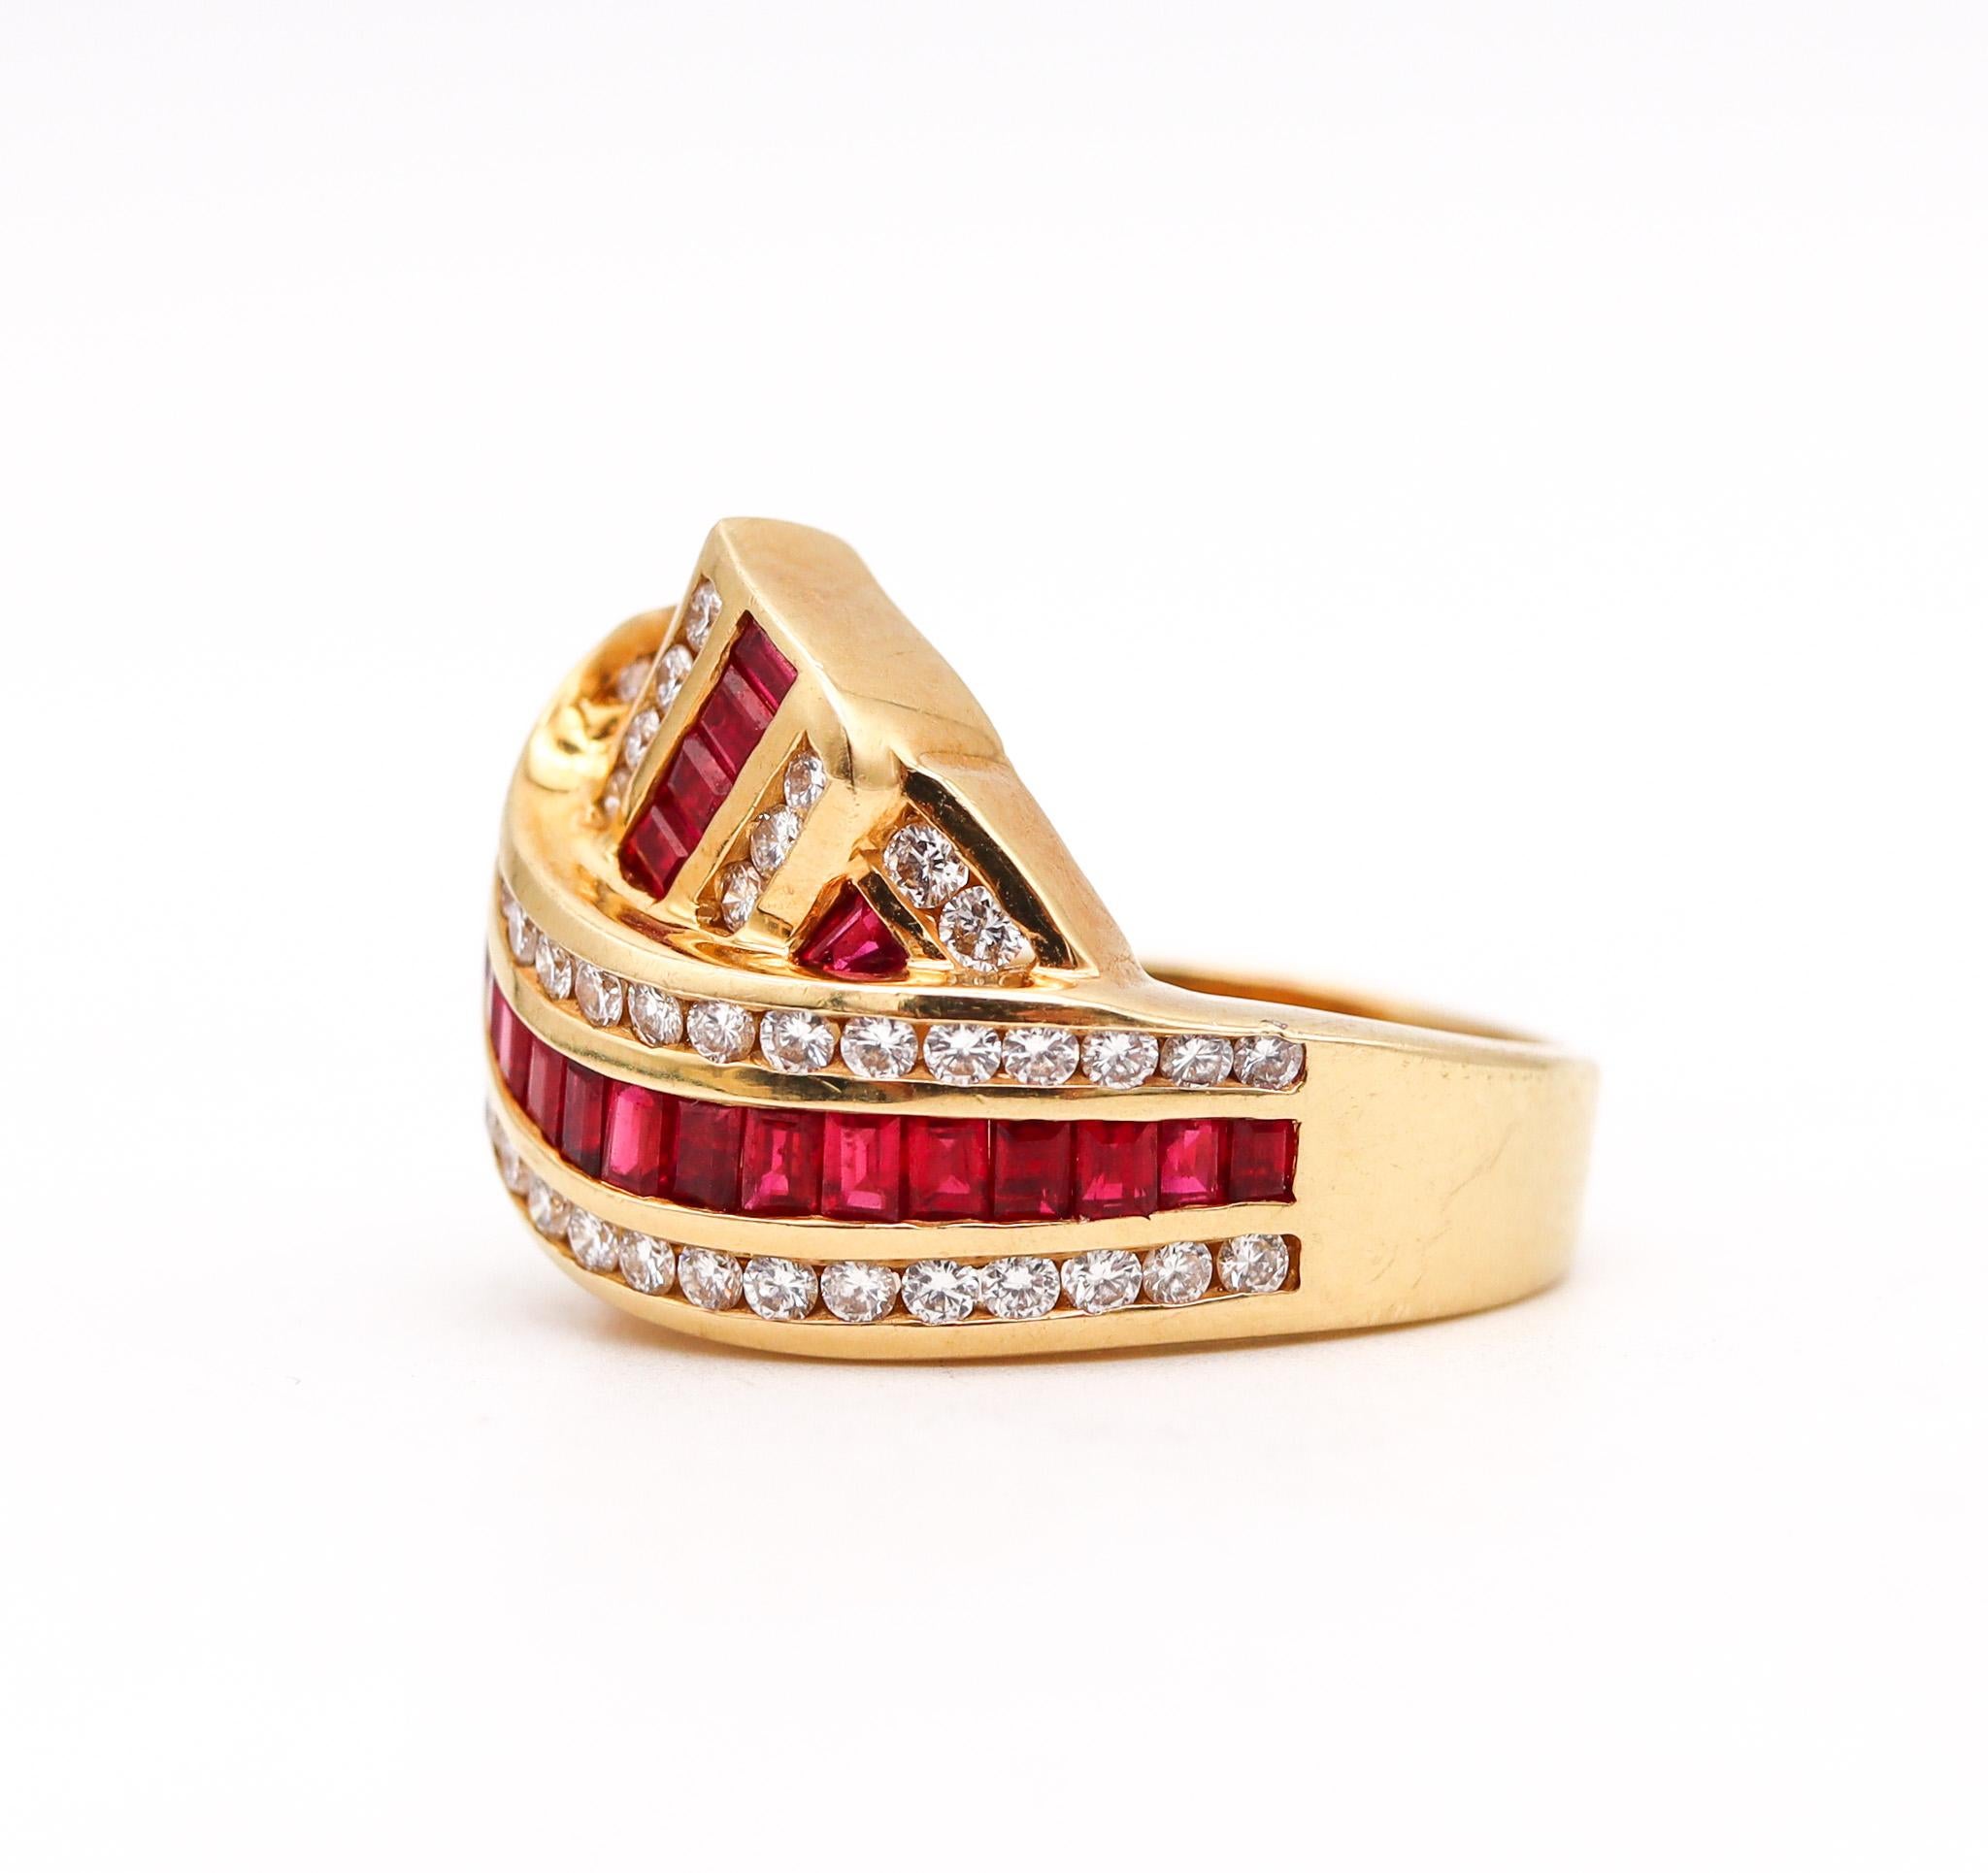 Brilliant Cut Charles Krypell Modern Ring in 18kt Gold with 4.11ctw in Diamonds and Rubies